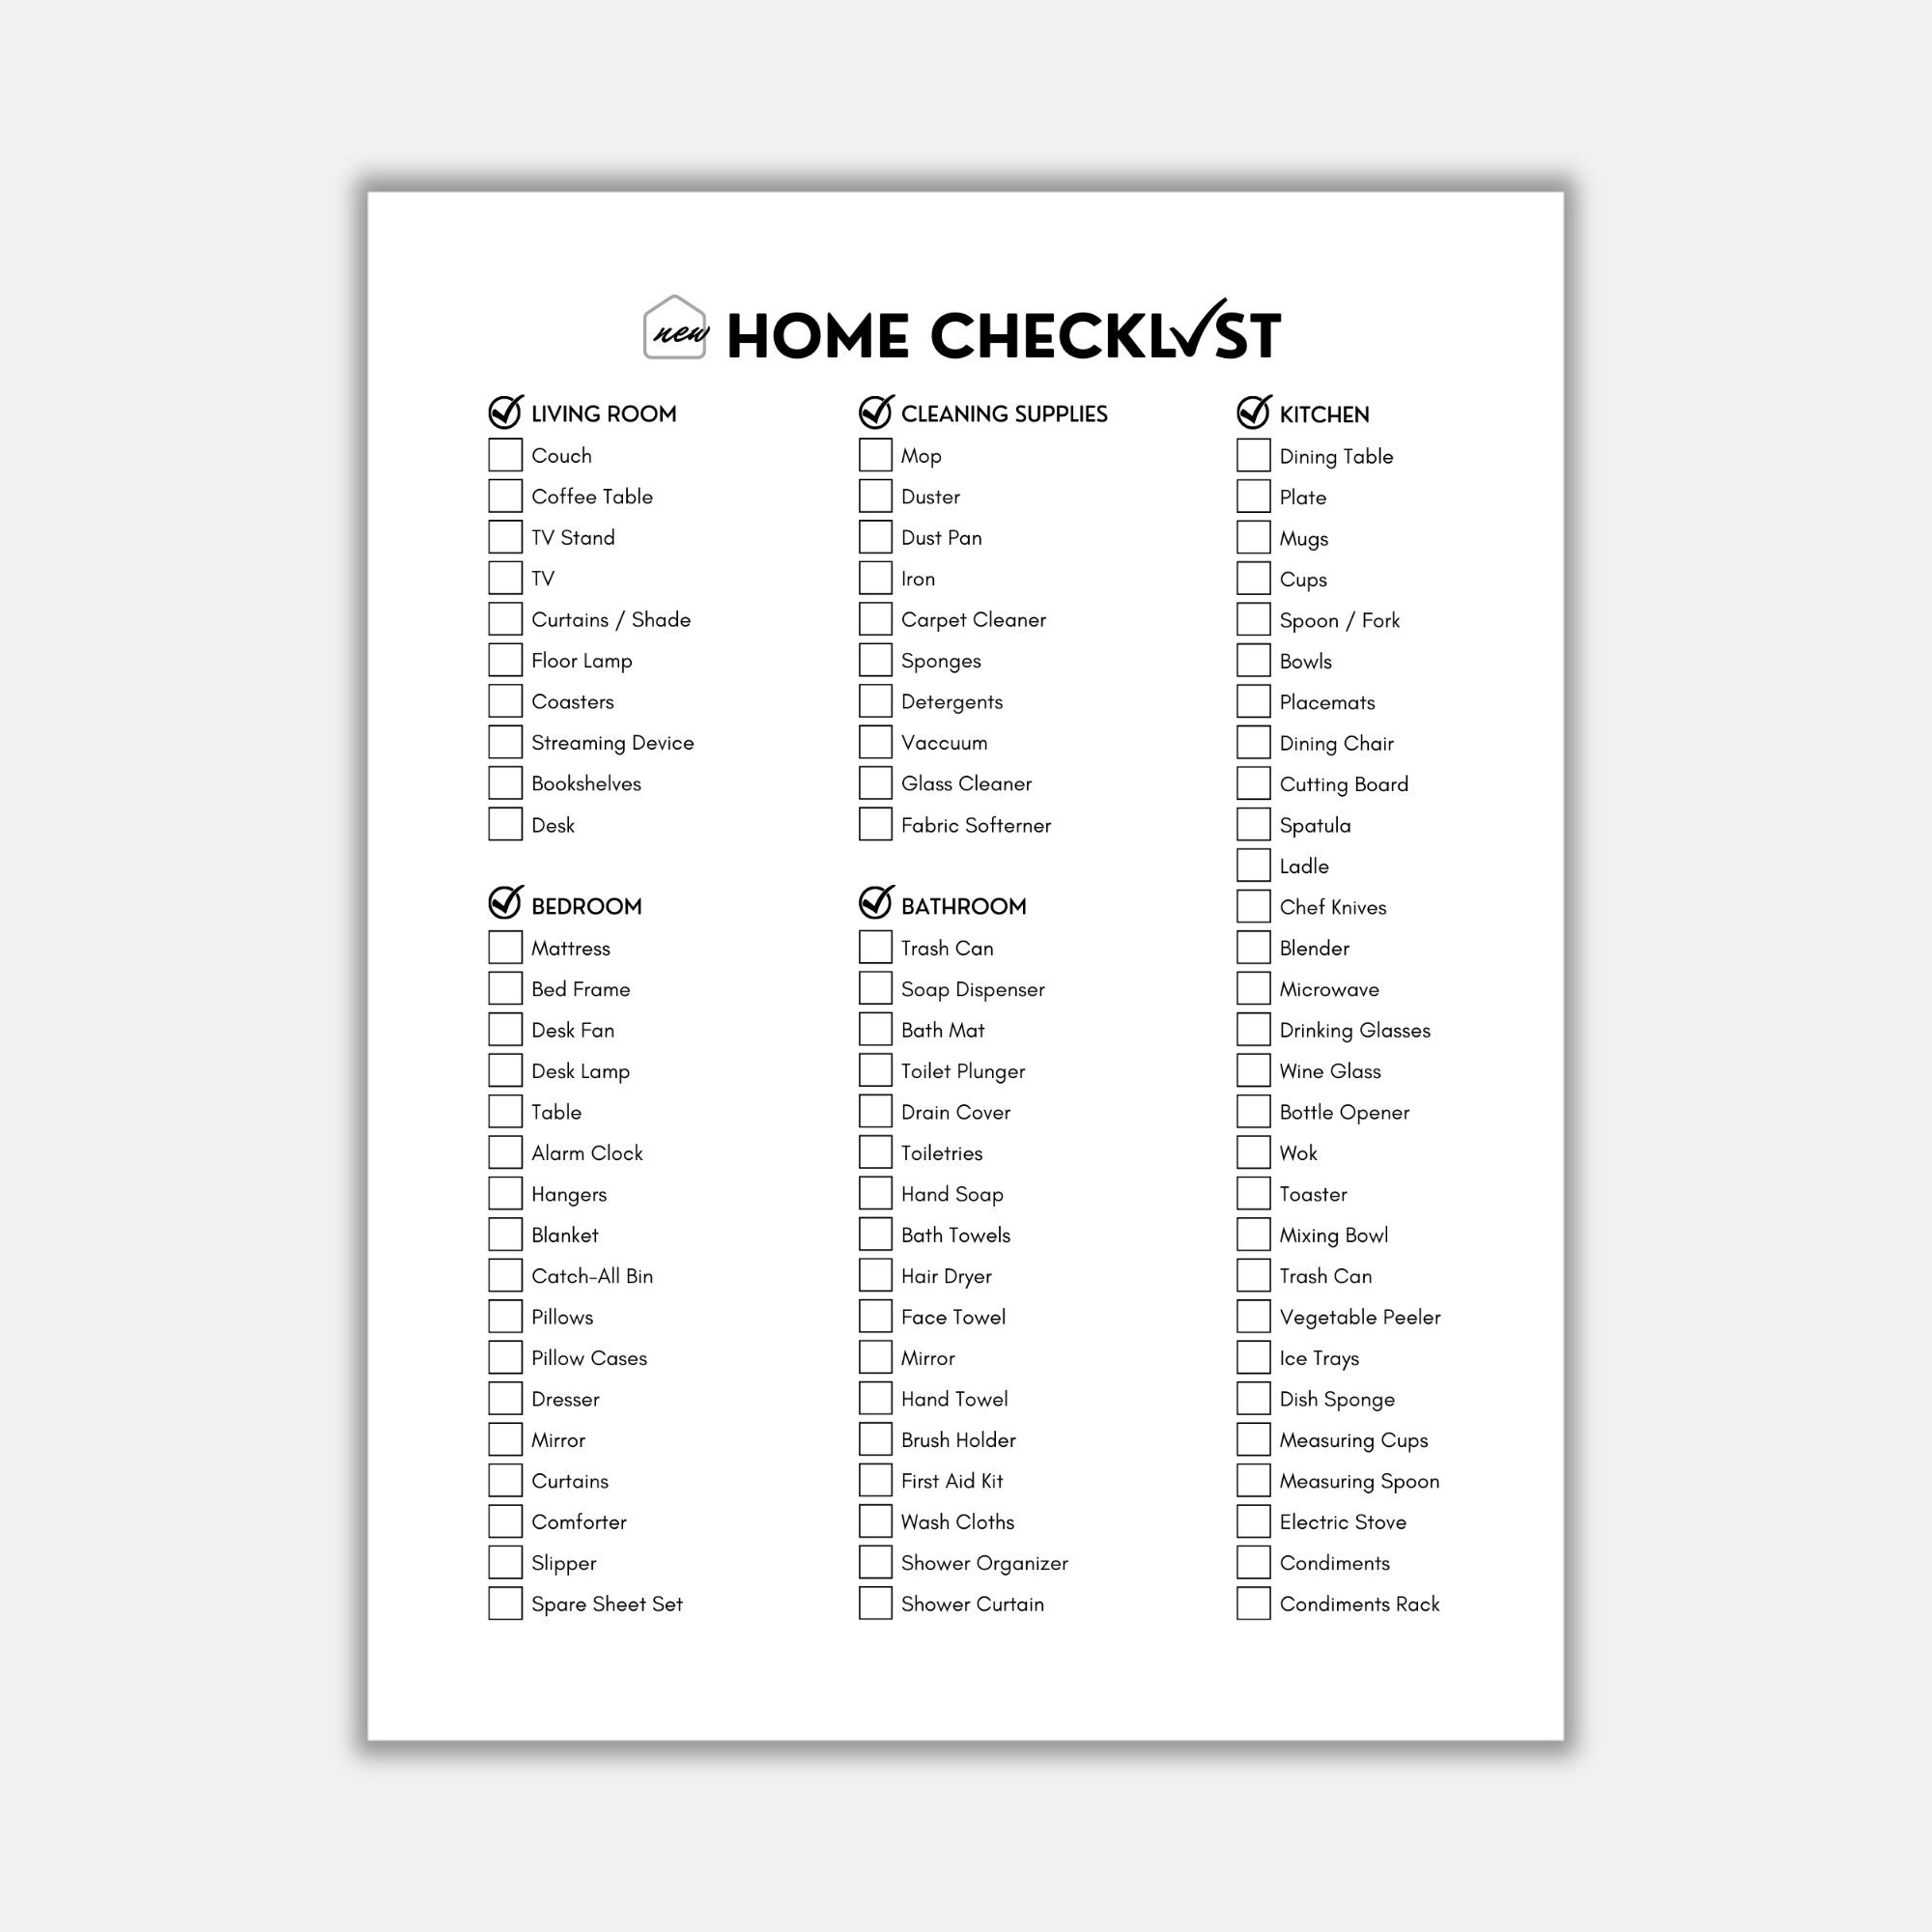 Moving Into A New House Checklist – Forbes Home